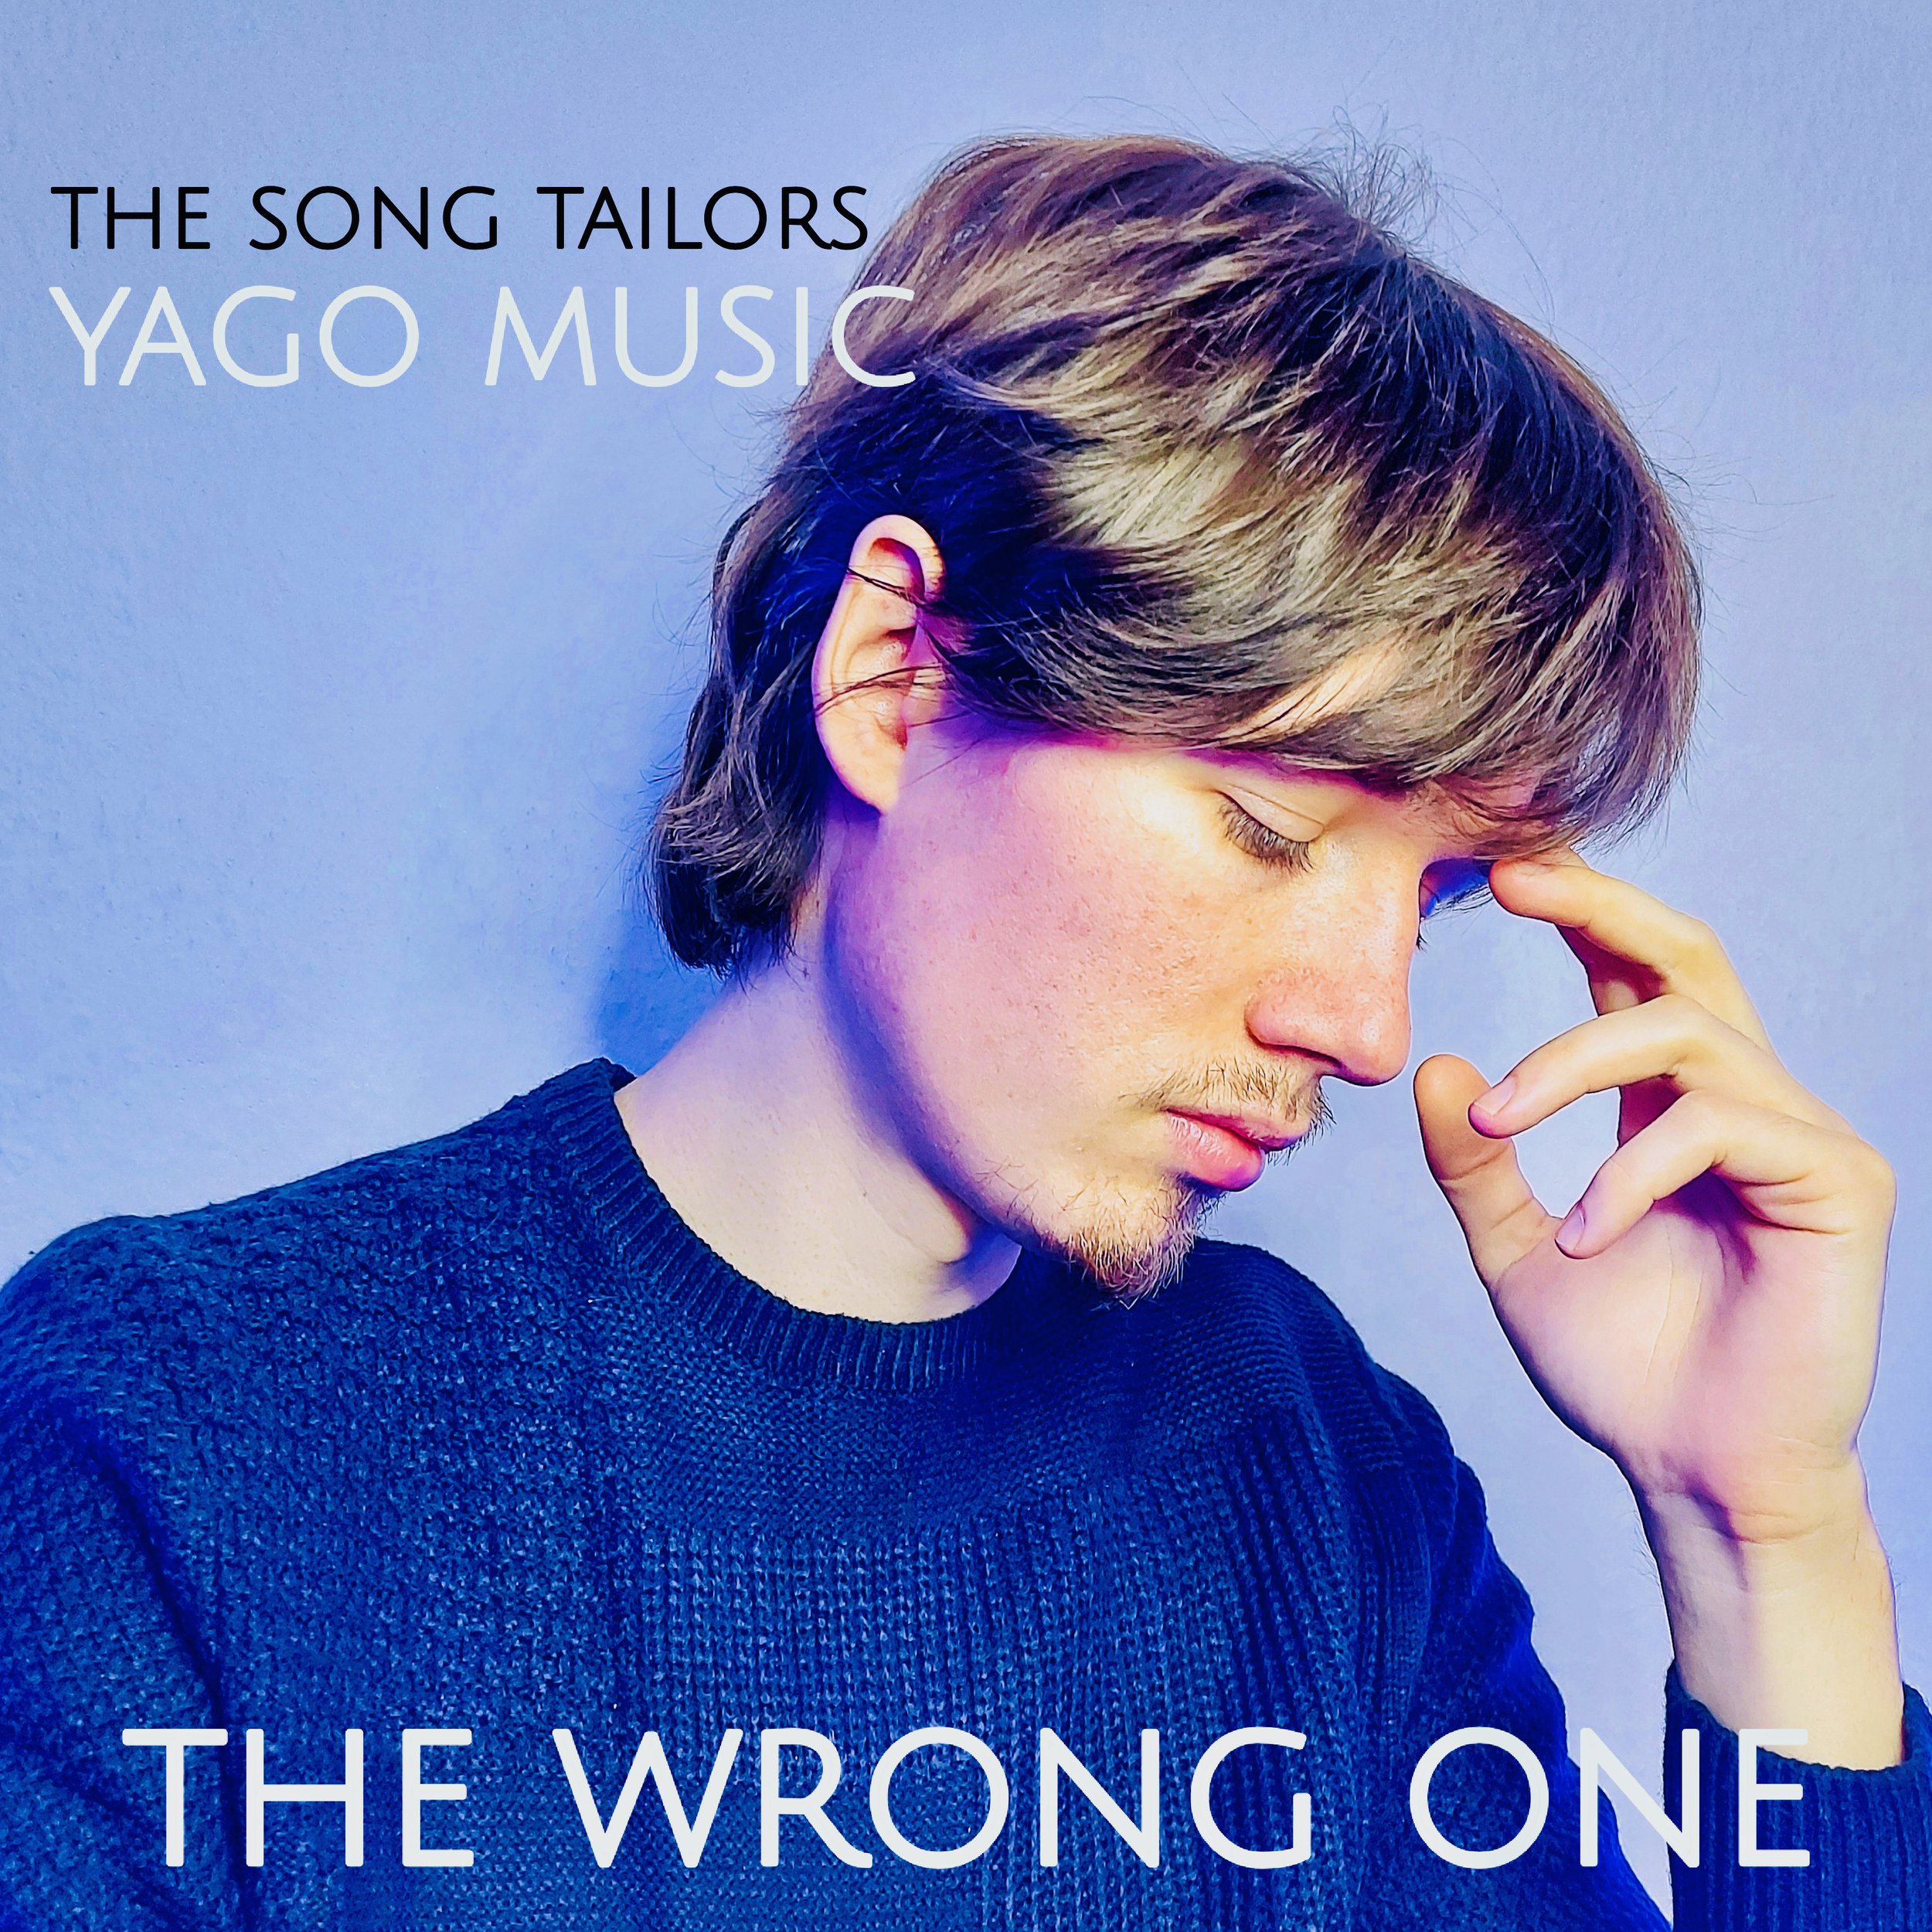 The Song Tailors The Wrong One encourages you to break negative